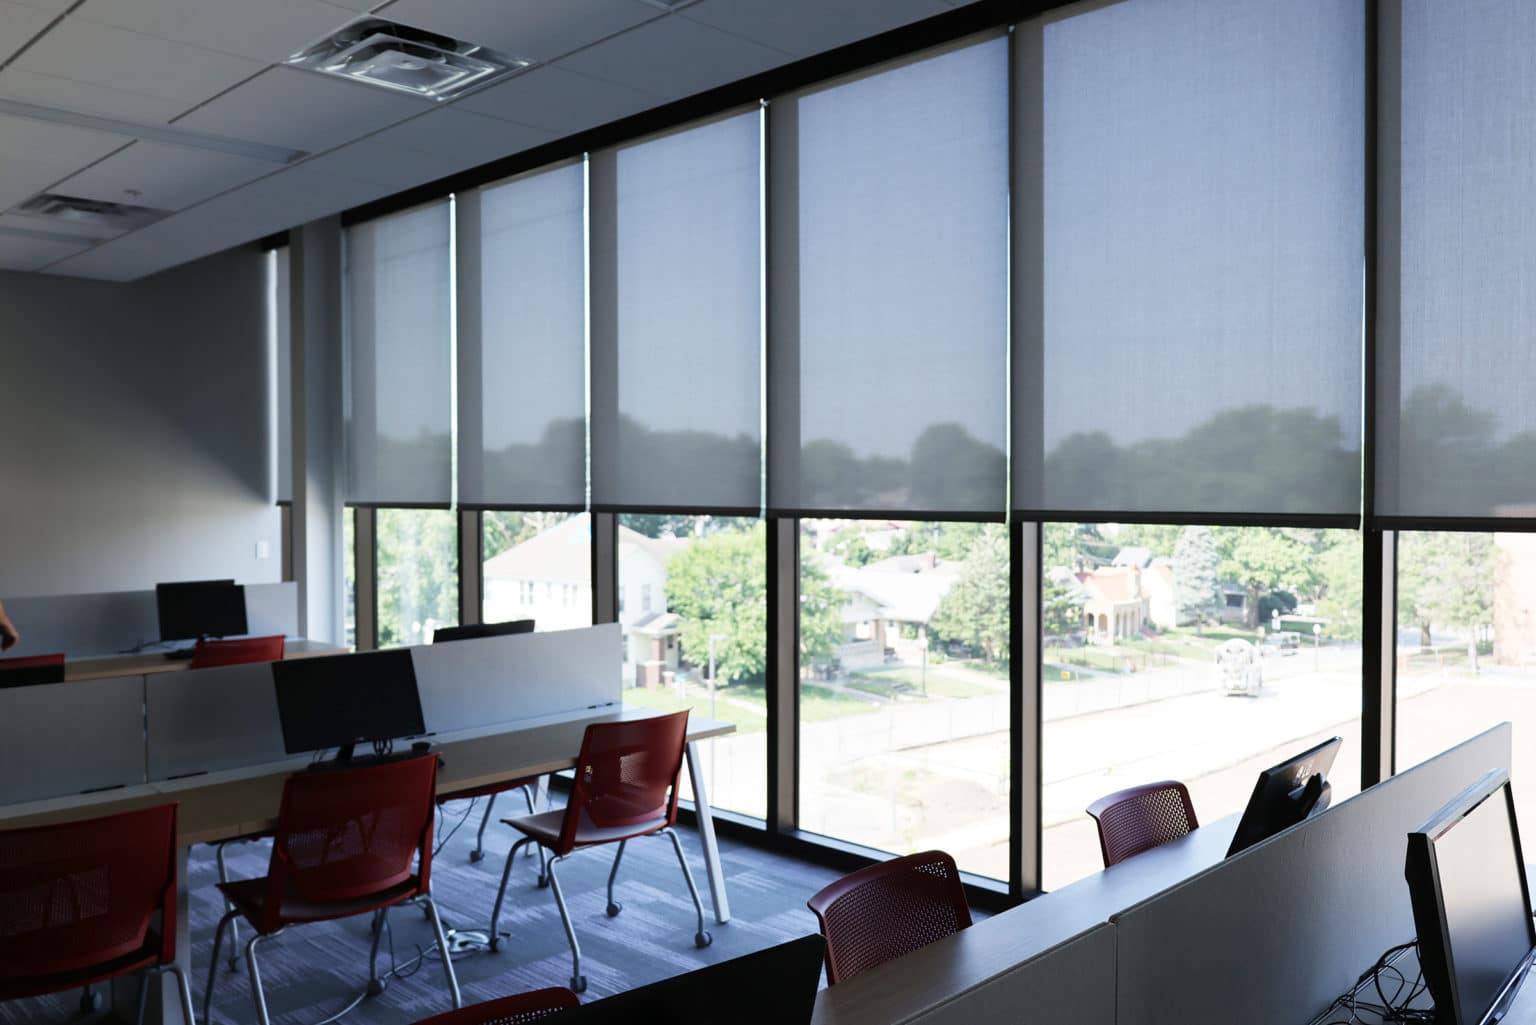 Commercial rollershades in a Donnelly College classroom